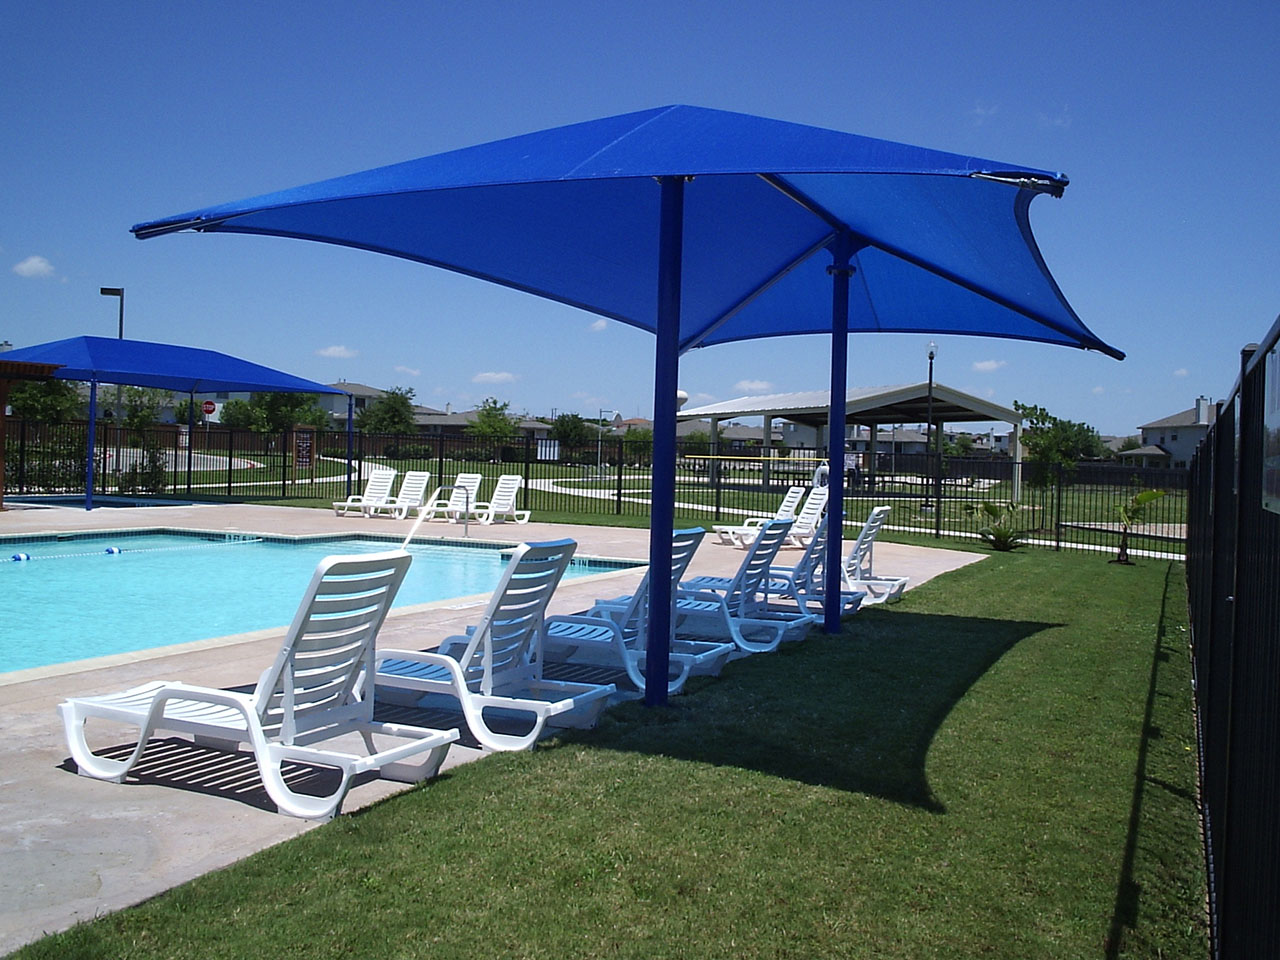 blue shade covering lawn chairs by pool